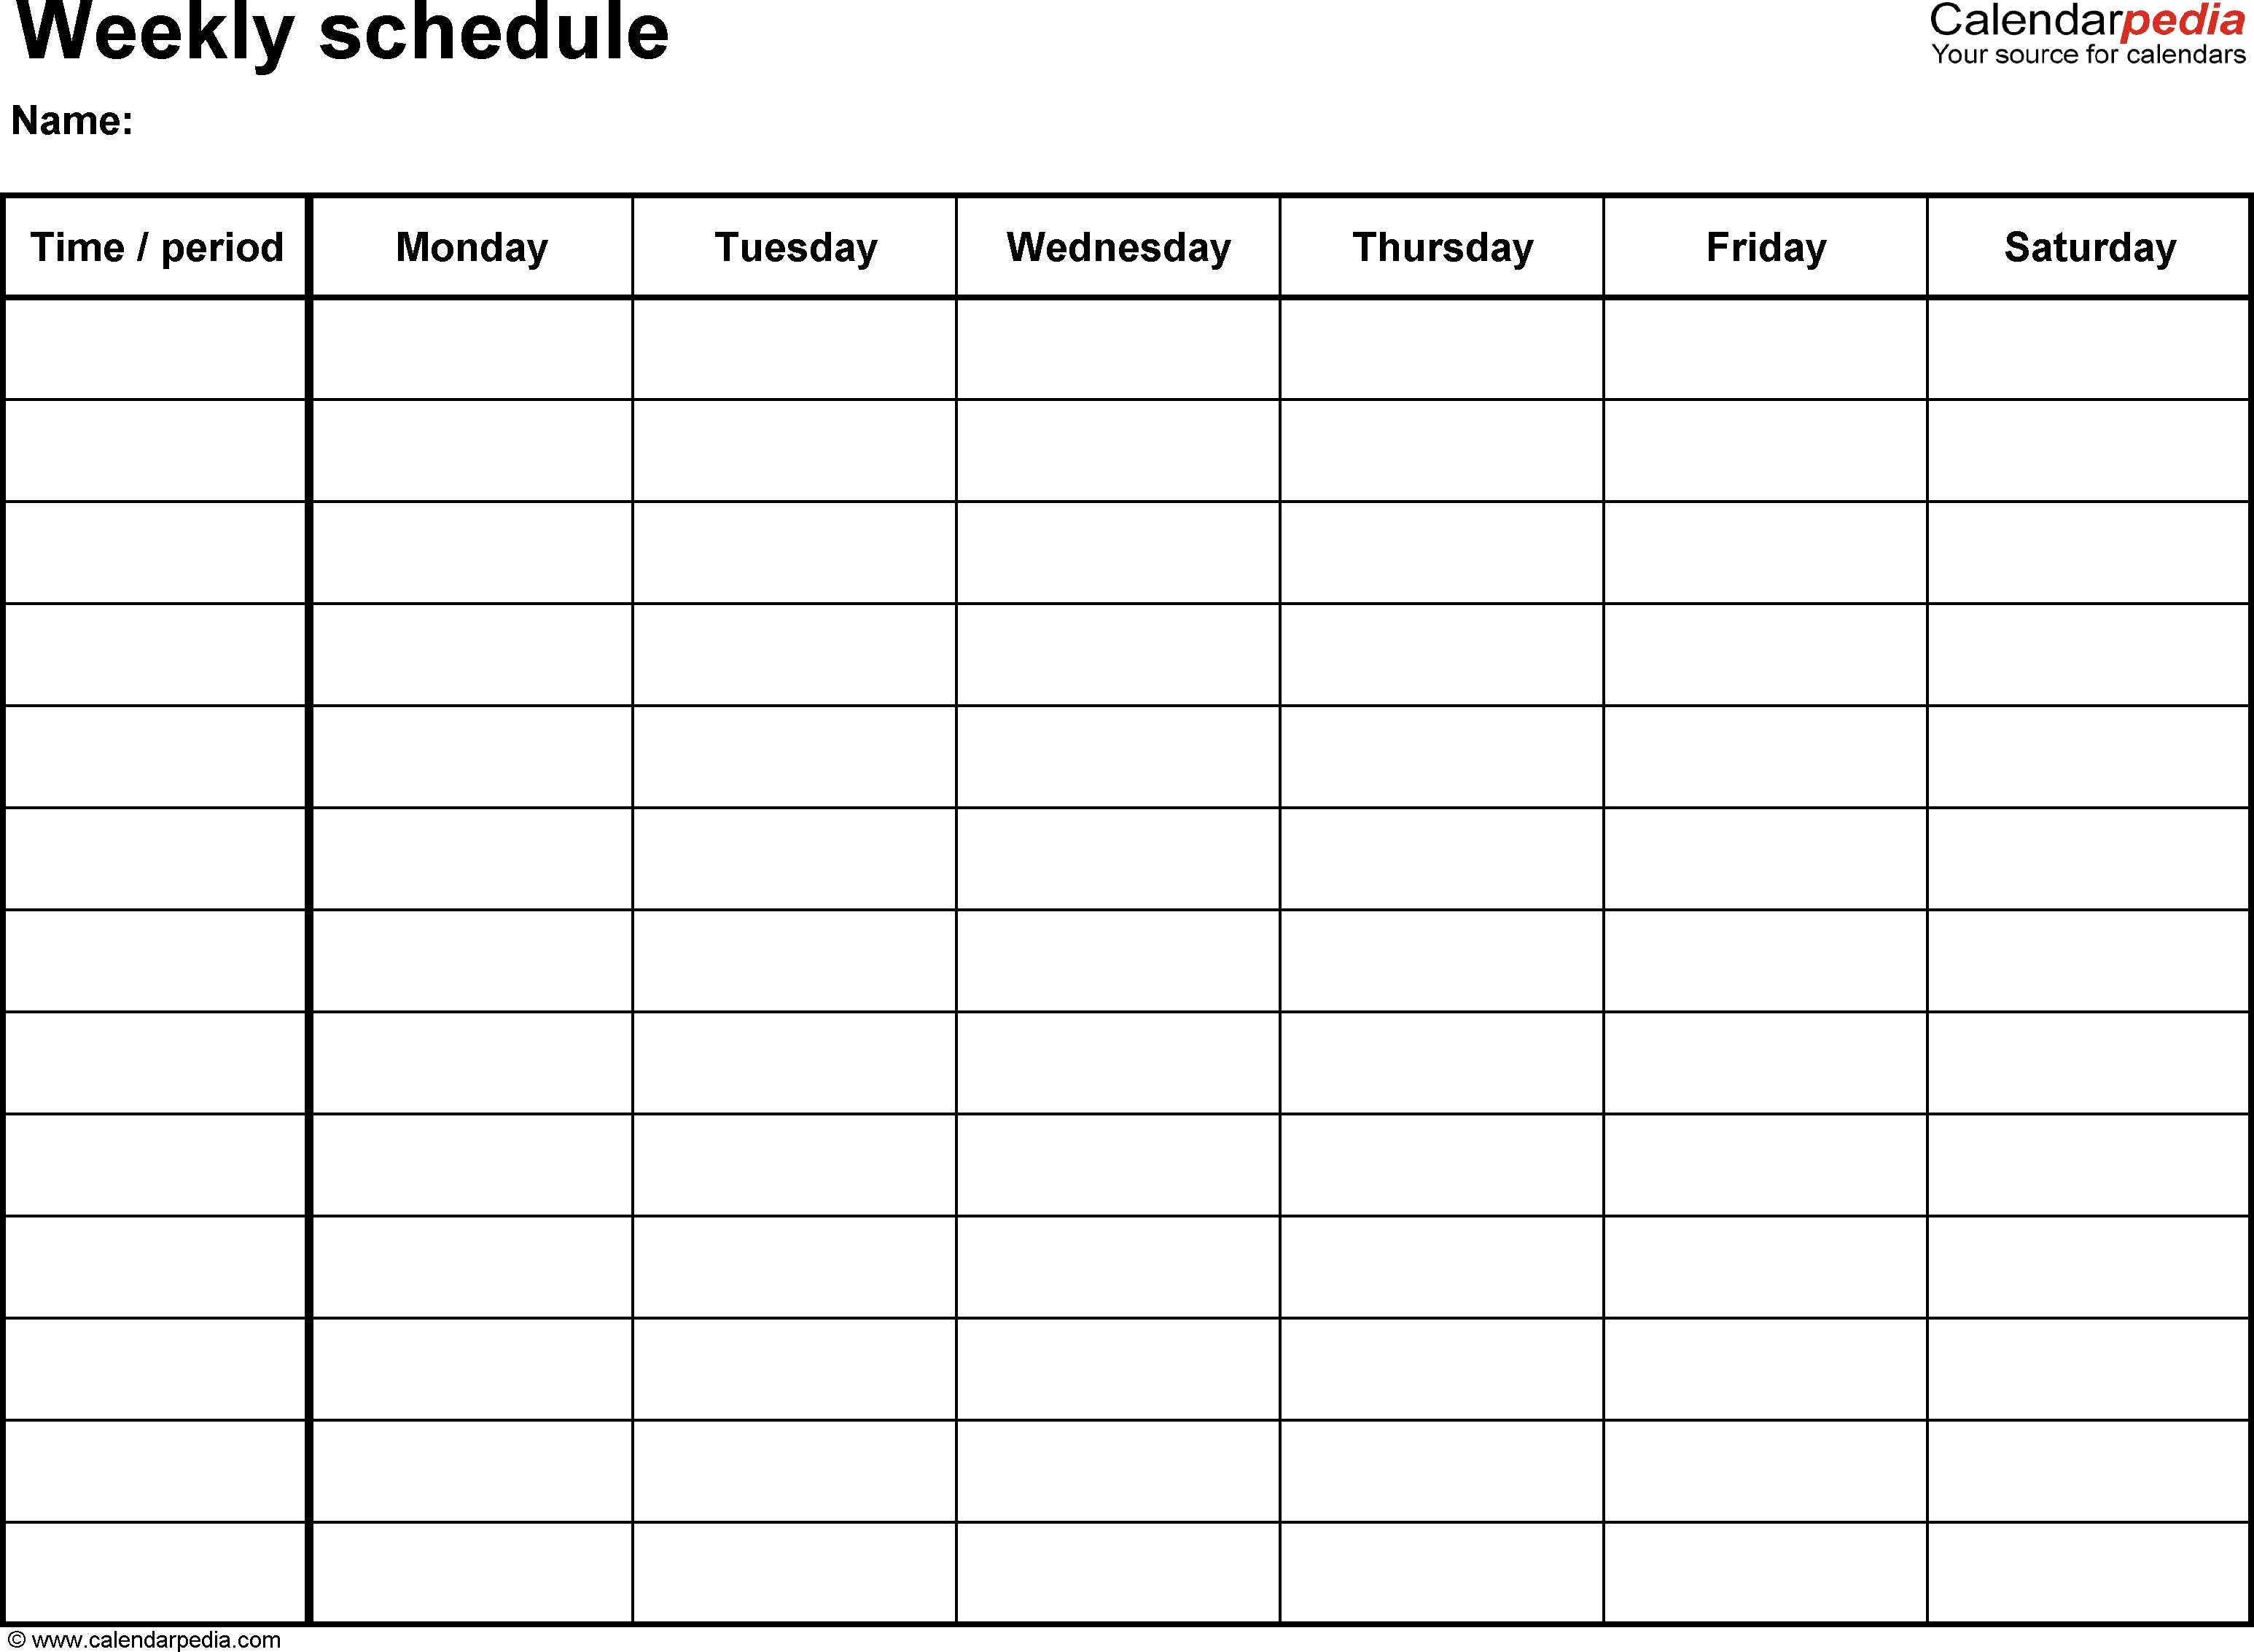 Free Weekly Schedule Templates For Word - 18 Templates inside Weekly Schedule Monday - Sunday